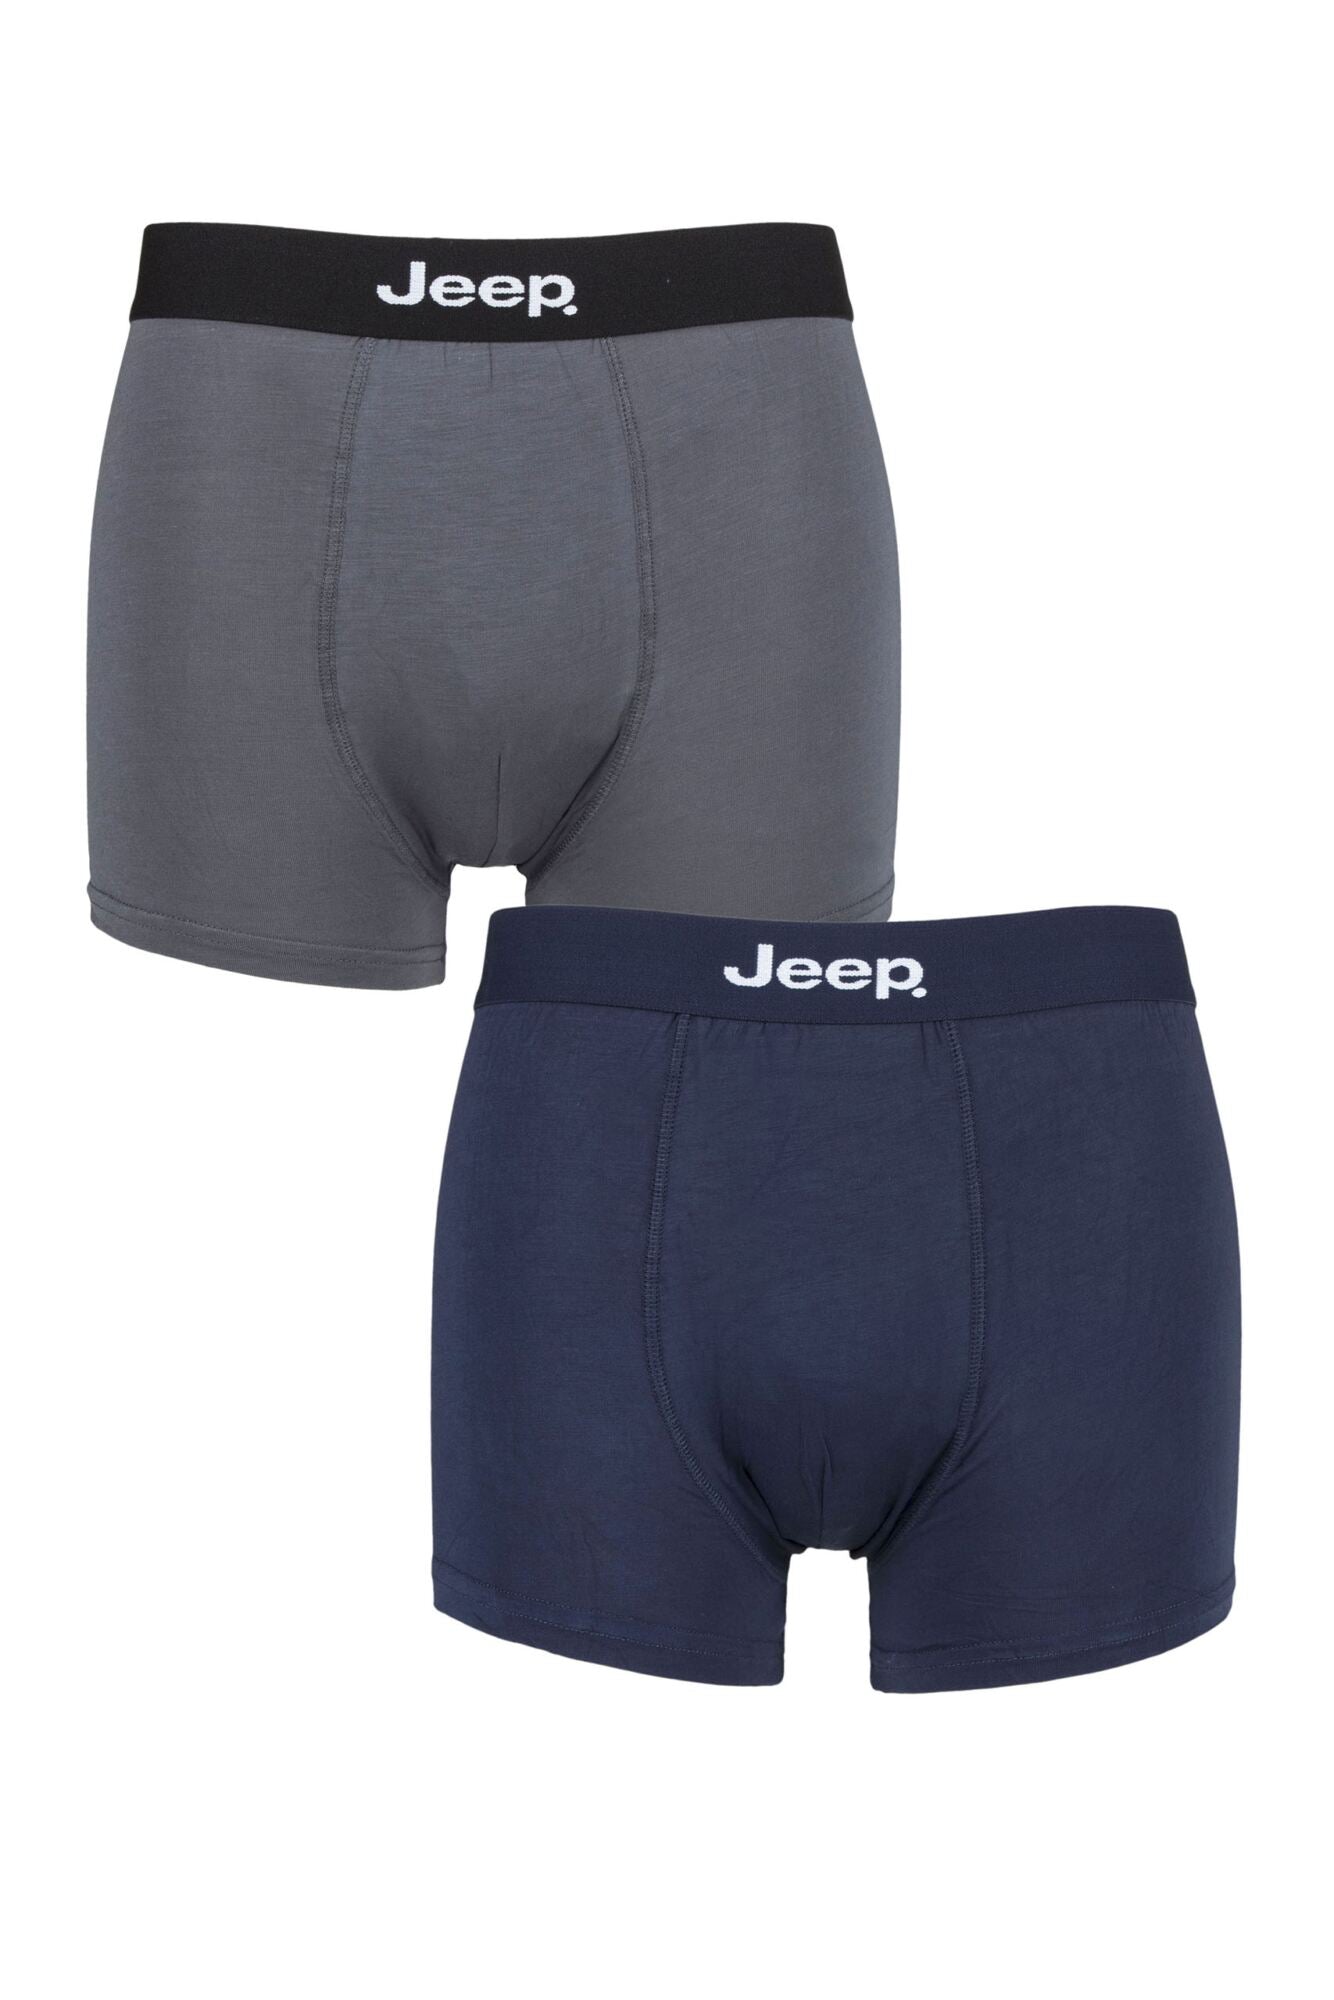 Jeep-Mens Underwear-Fitted Bamboo Trunks-2 Pair Pack-JM891-Navy/Charco –  Whites of Kent Ltd